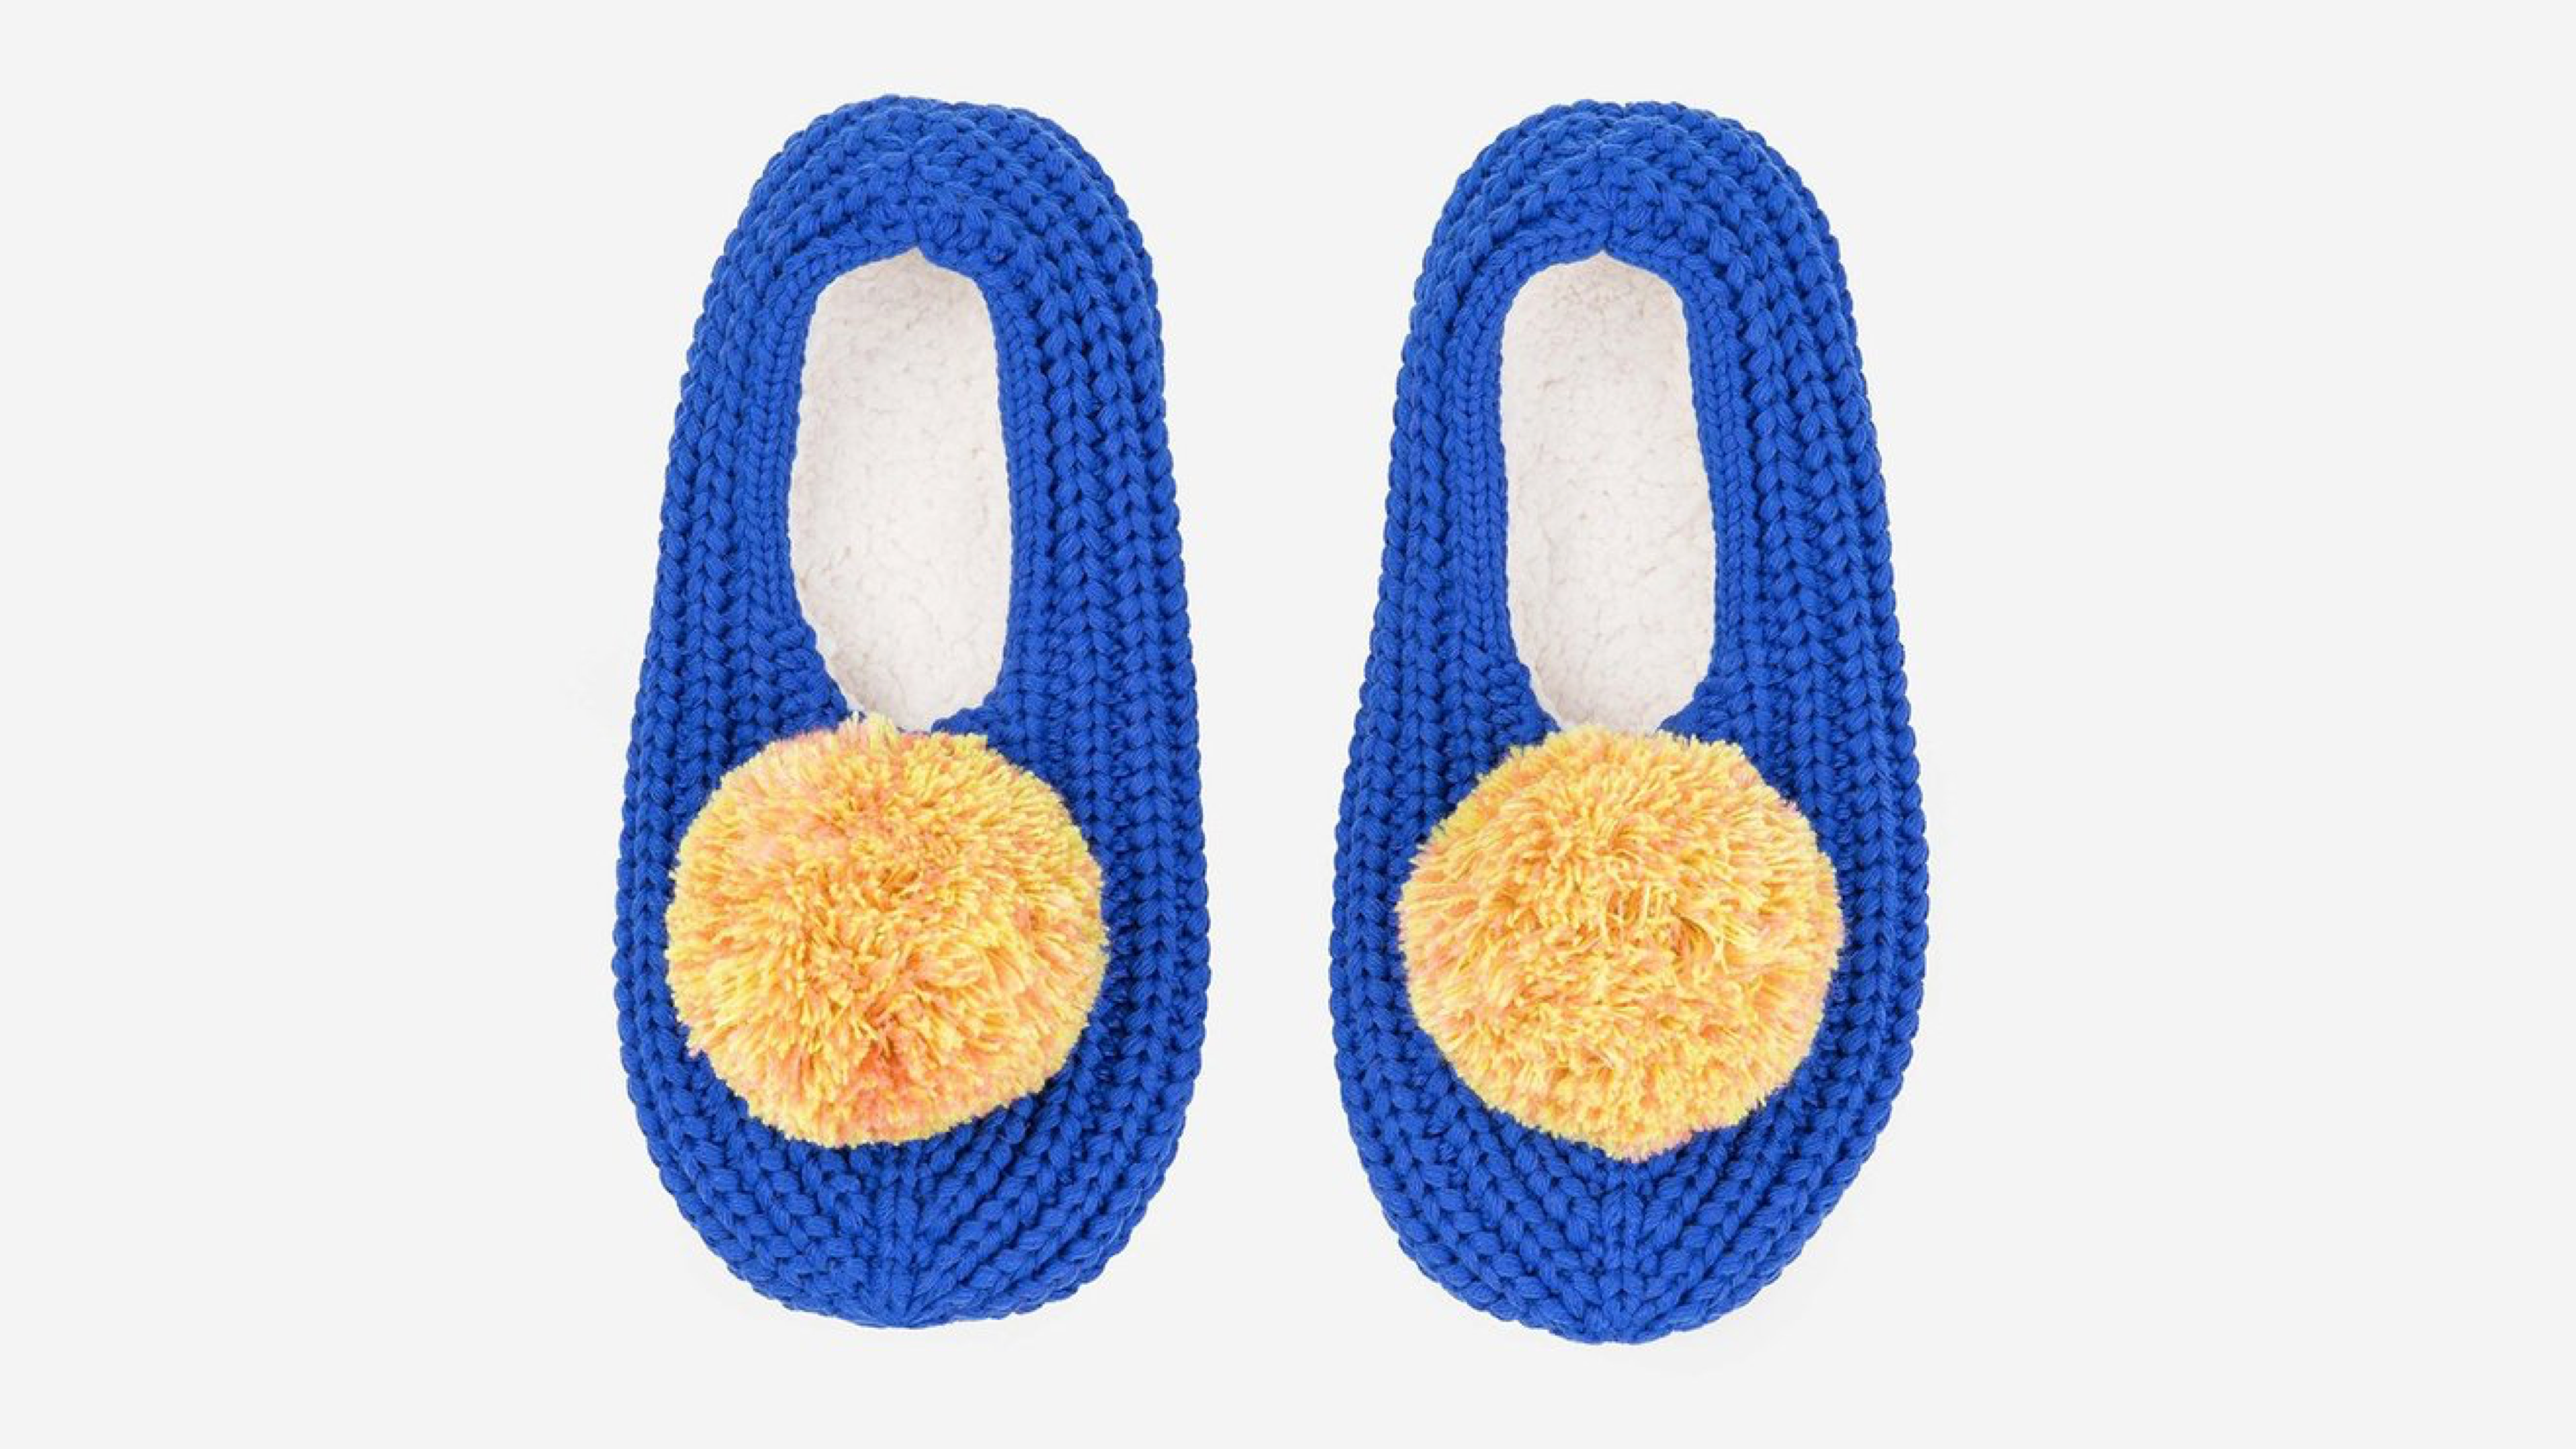 cobalt blue slippers with yellow pom poms on the them